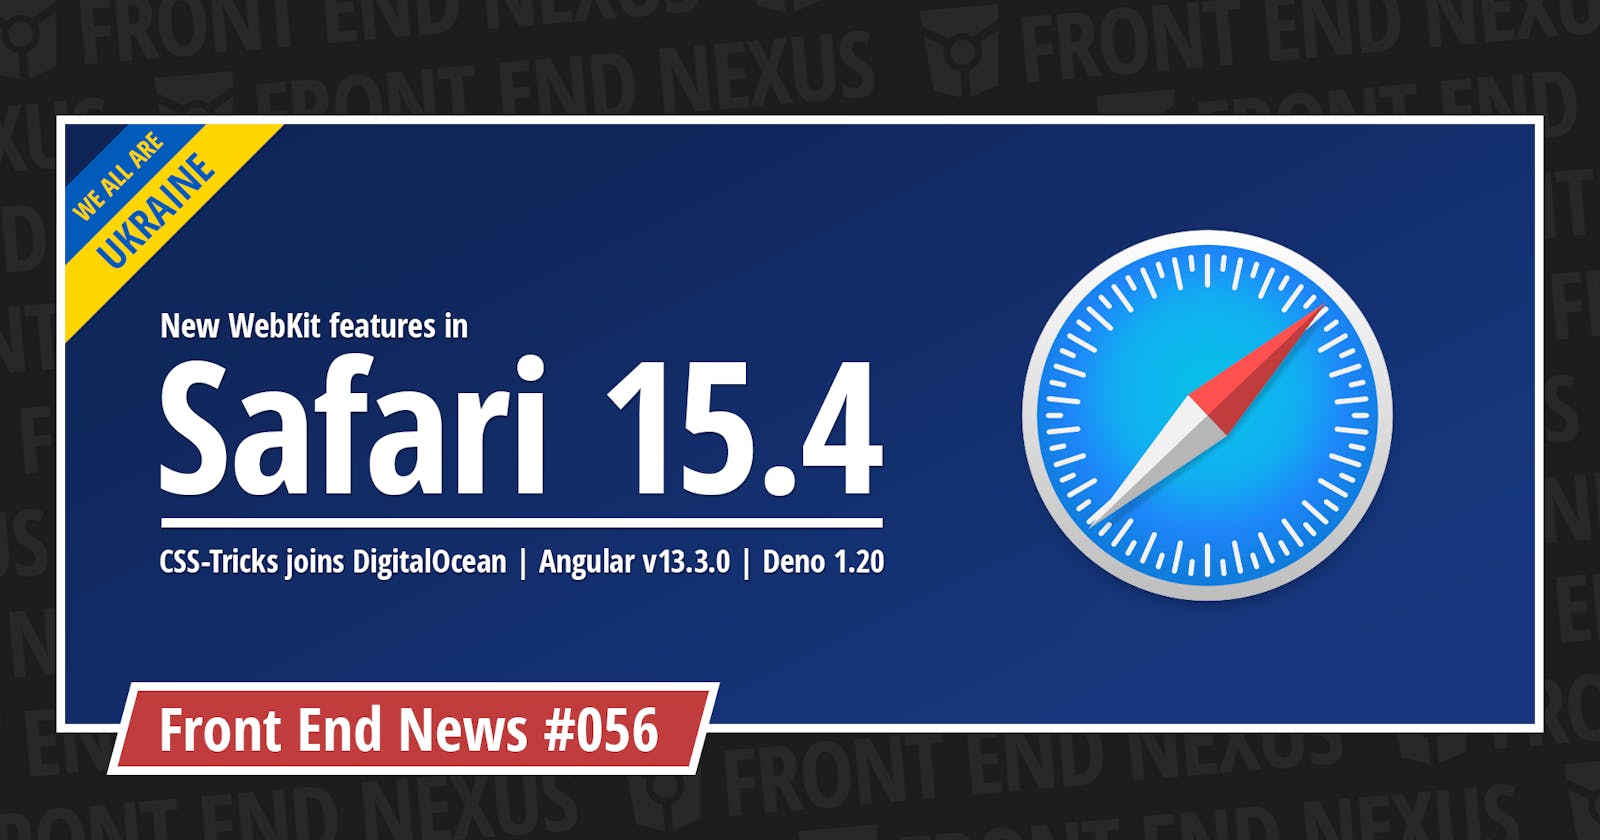 New WebKit Features in Safari 15.4, CSS-Tricks joins DigitalOcean, Angular v13.3.0, Deno 1.20, and more | Front End News #056